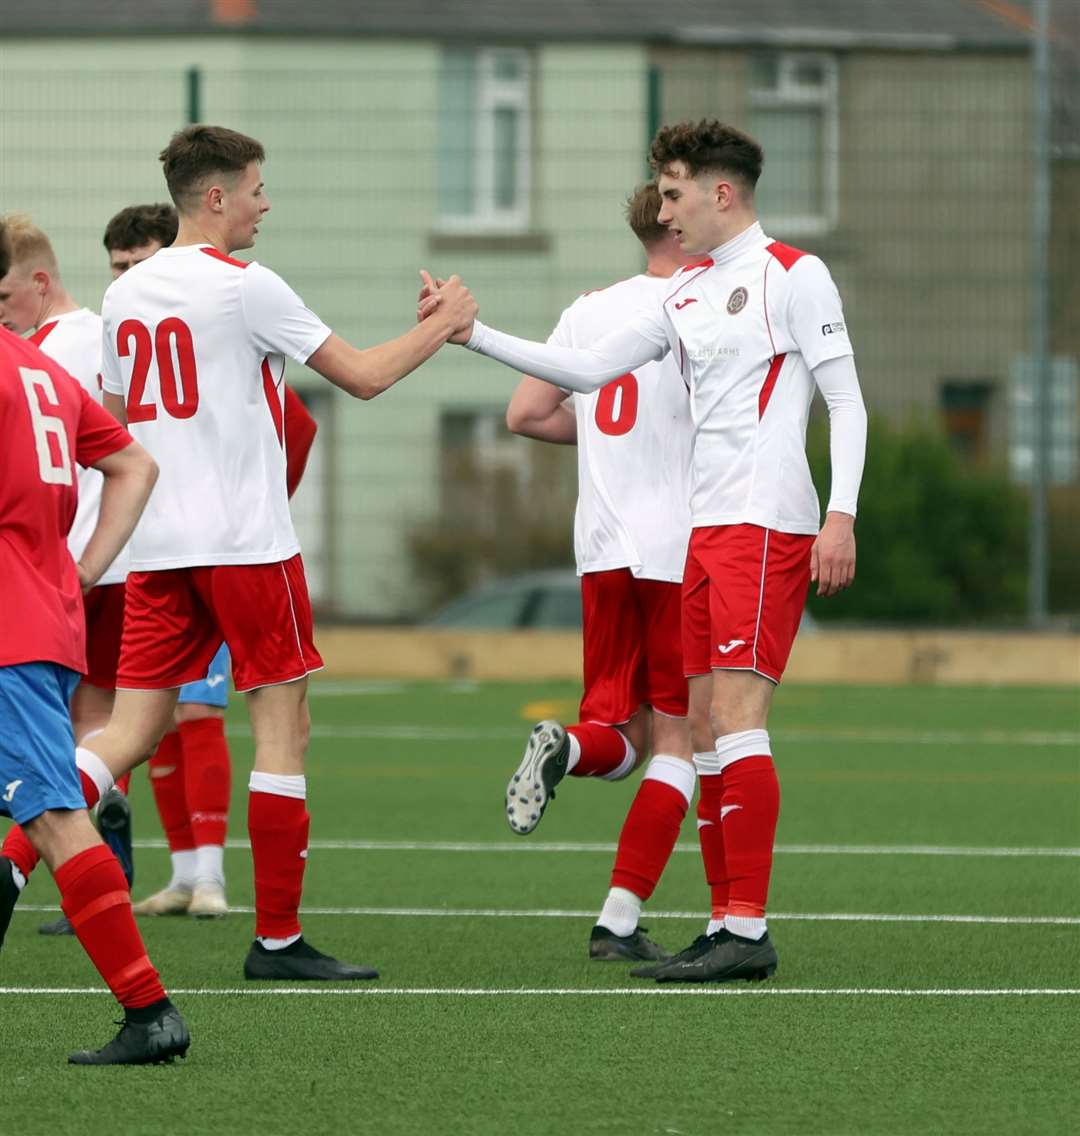 Stuart Campbell (right) is congratulated by James Mackintosh after scoring Halkirk United's equaliser. Picture: James Gunn